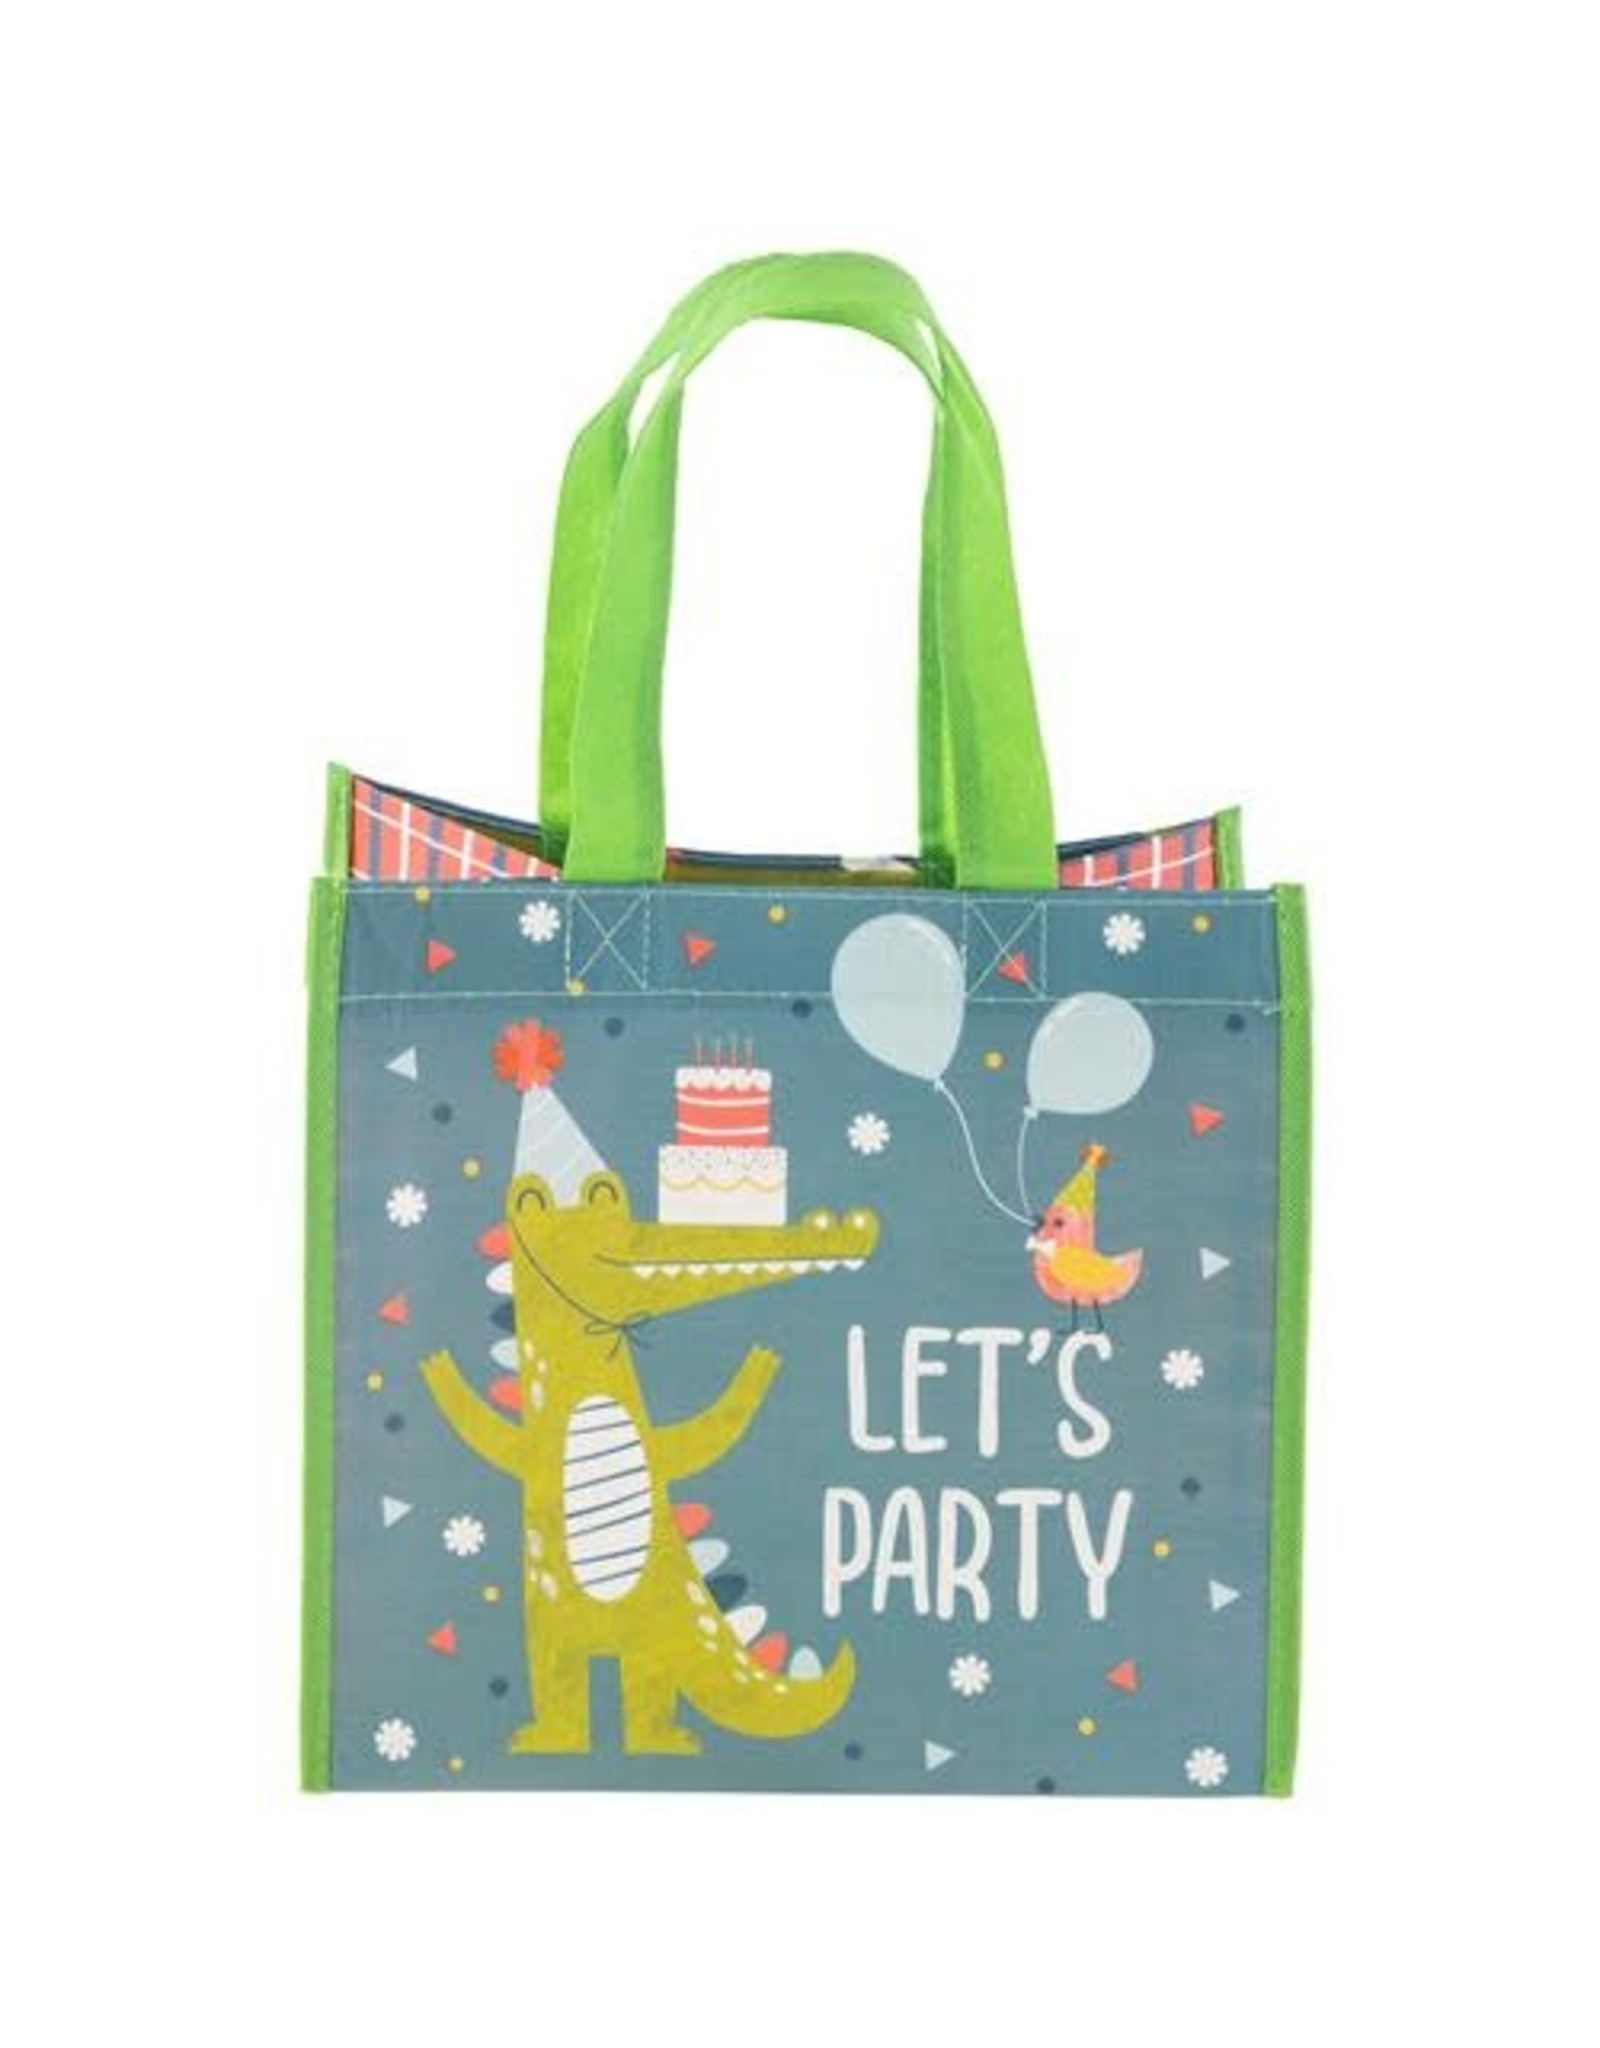 Stephen Joseph Small Recycled Gift Bag - Let's Party